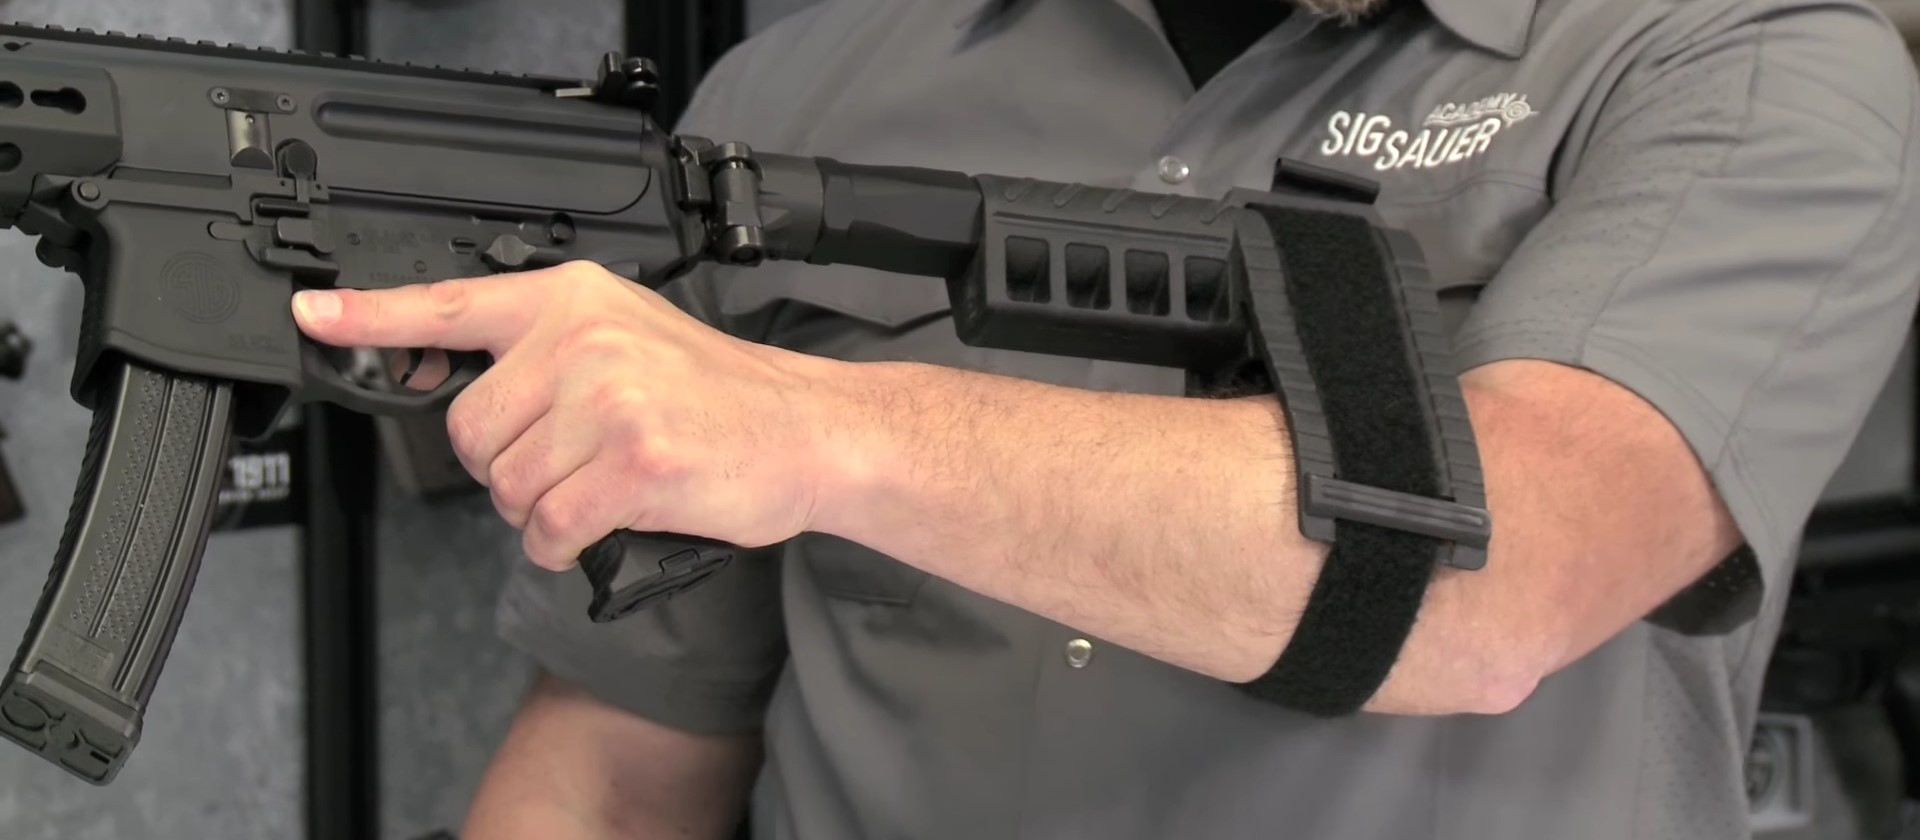 Applications and Advantages of the Pistol Stabilizing Brace 